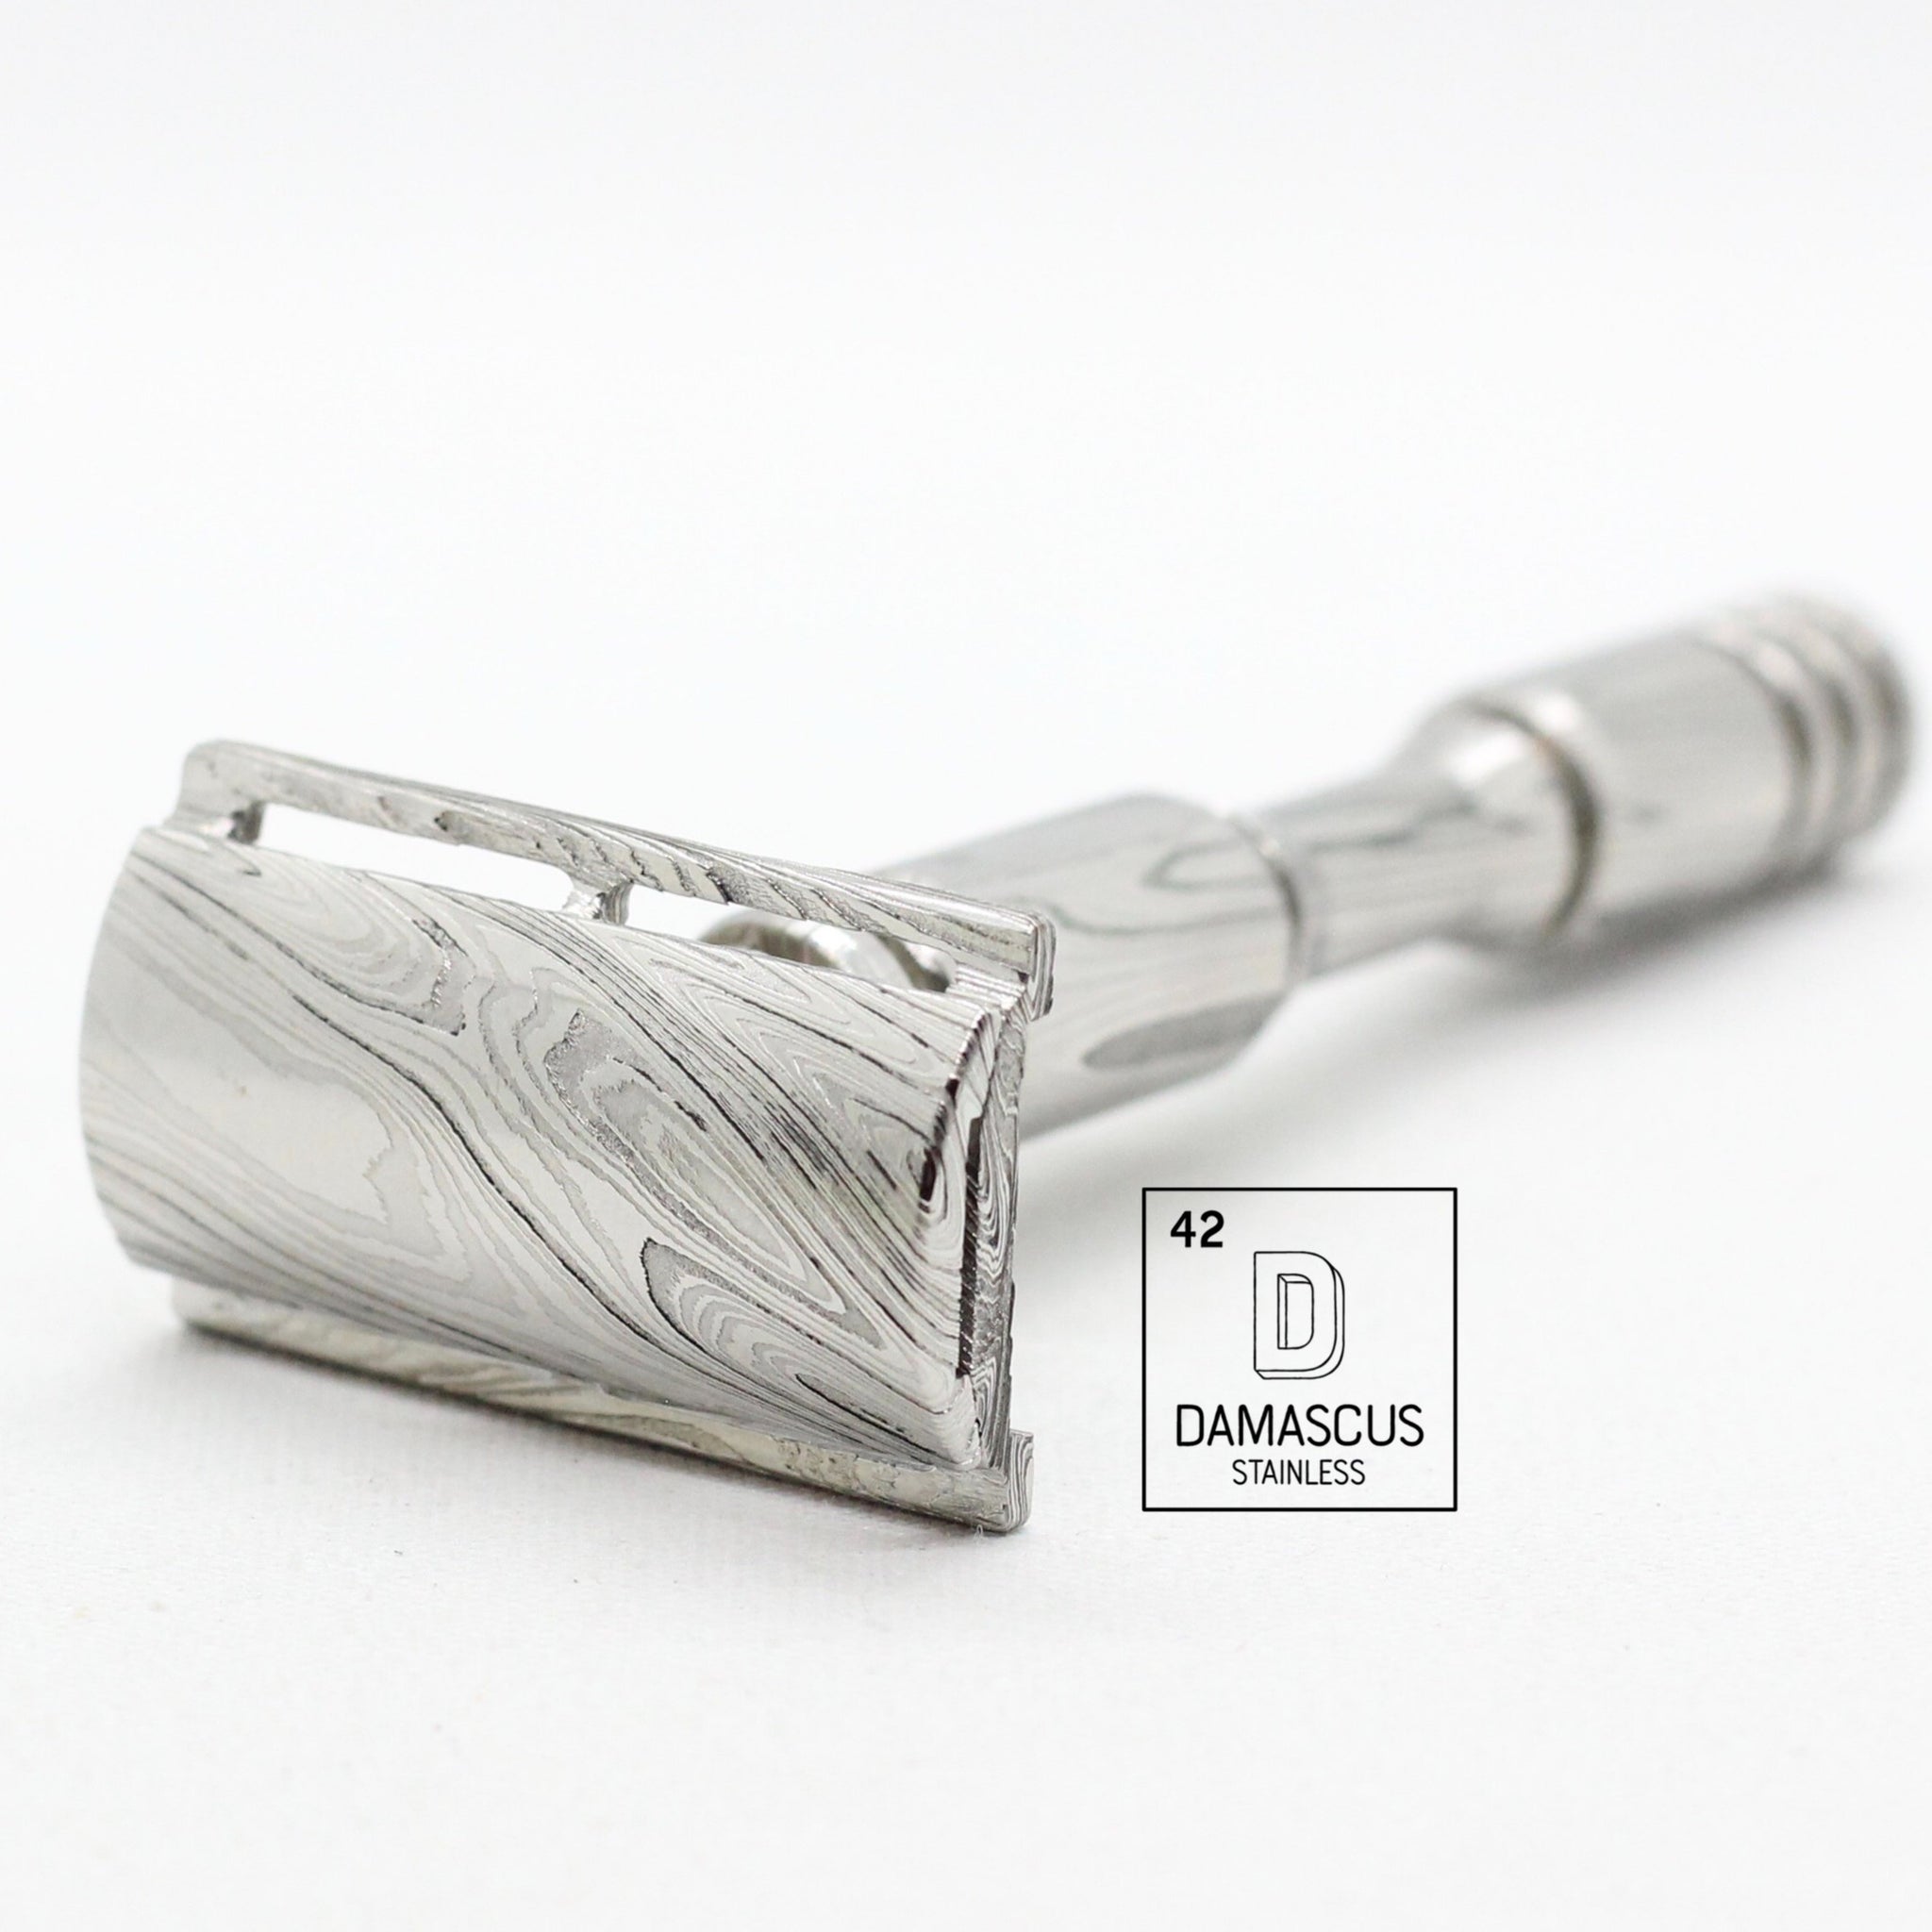 Pinch design to clamp blade for barber shop shave - Stainless steel Damascus with twist pattern single edge razor a double edge safety razor for wet shaving polished grade 304 and 316 - custom forged in the USA - luxury high end safety razor to reduce ingrown hairs and irritation - for a smooth shave